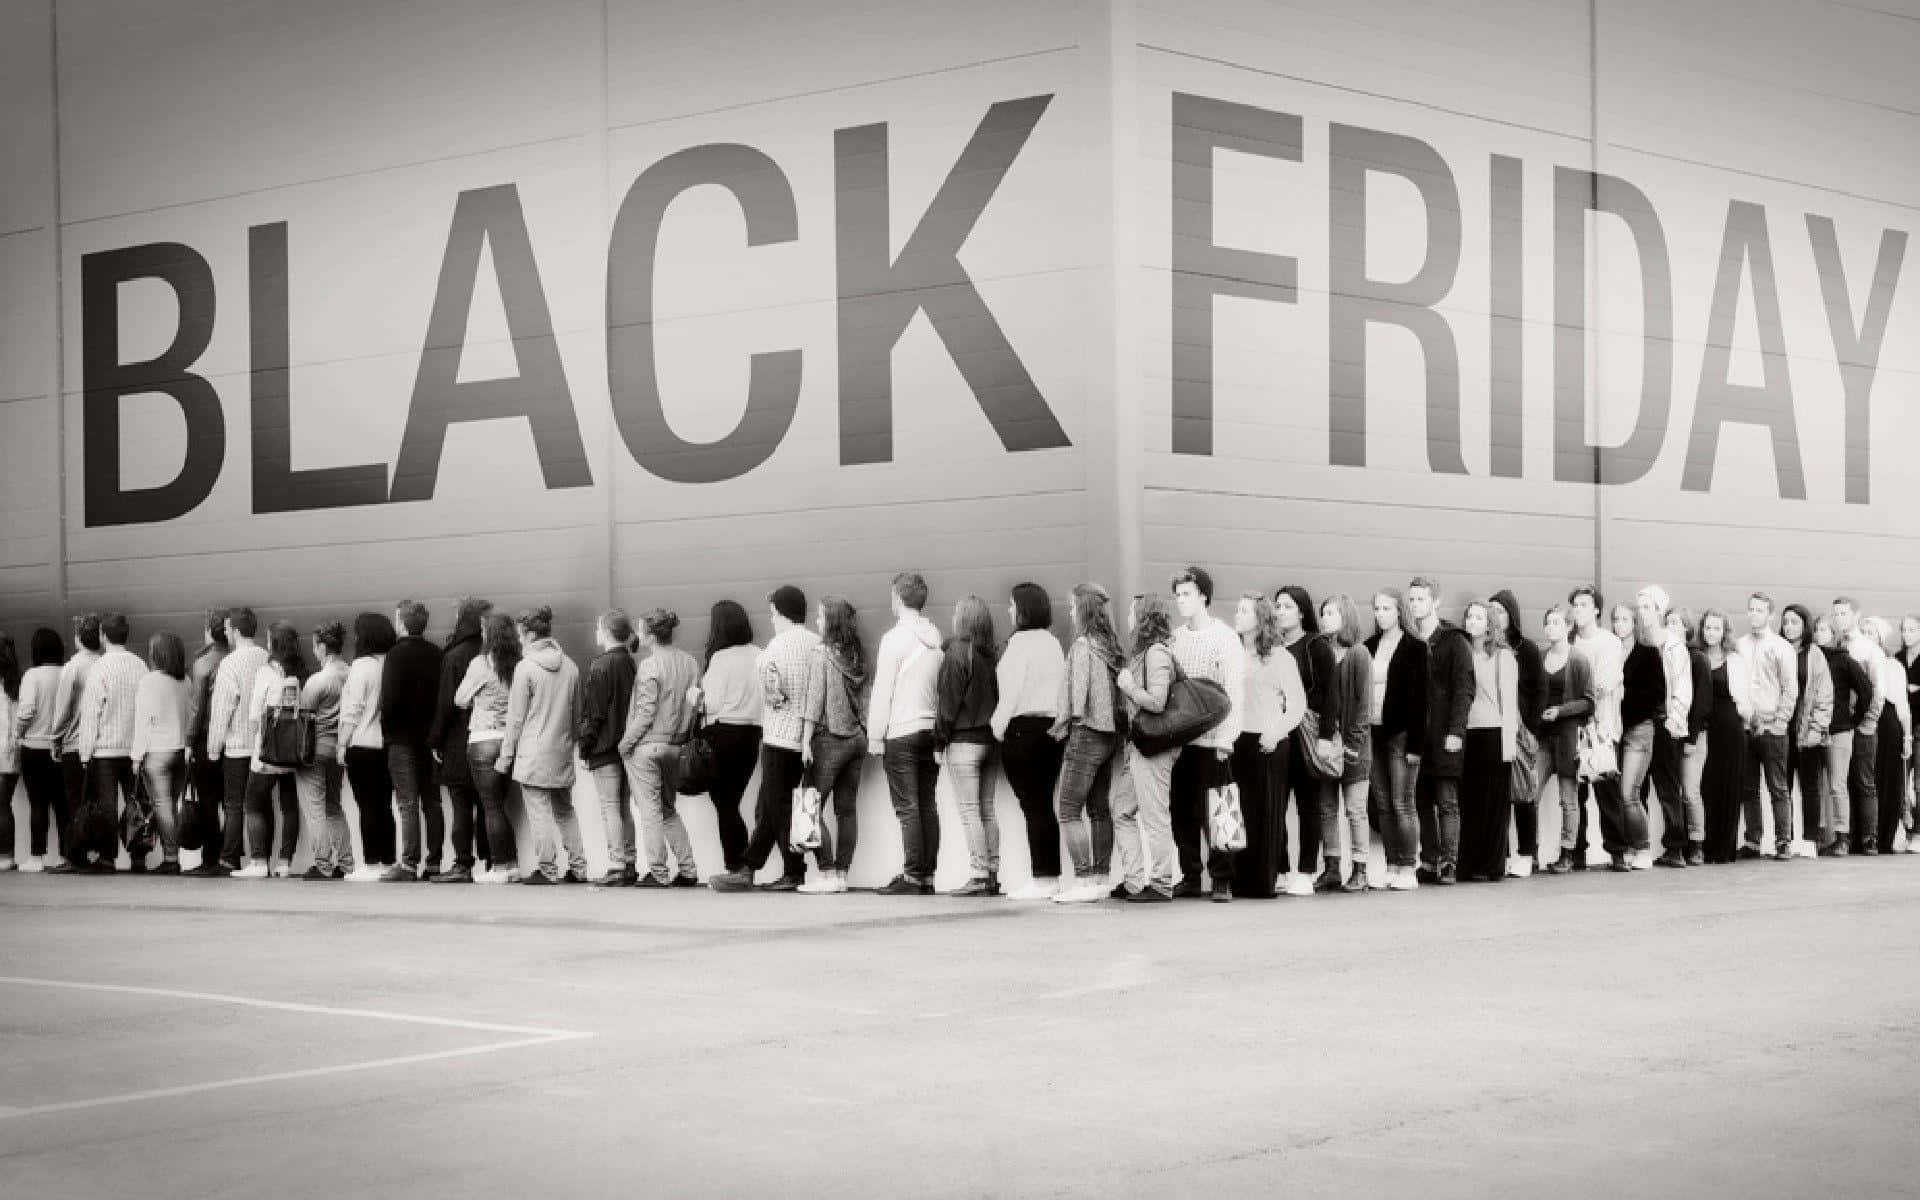 Black Friday - A Group Of People Standing In Front Of A Sign